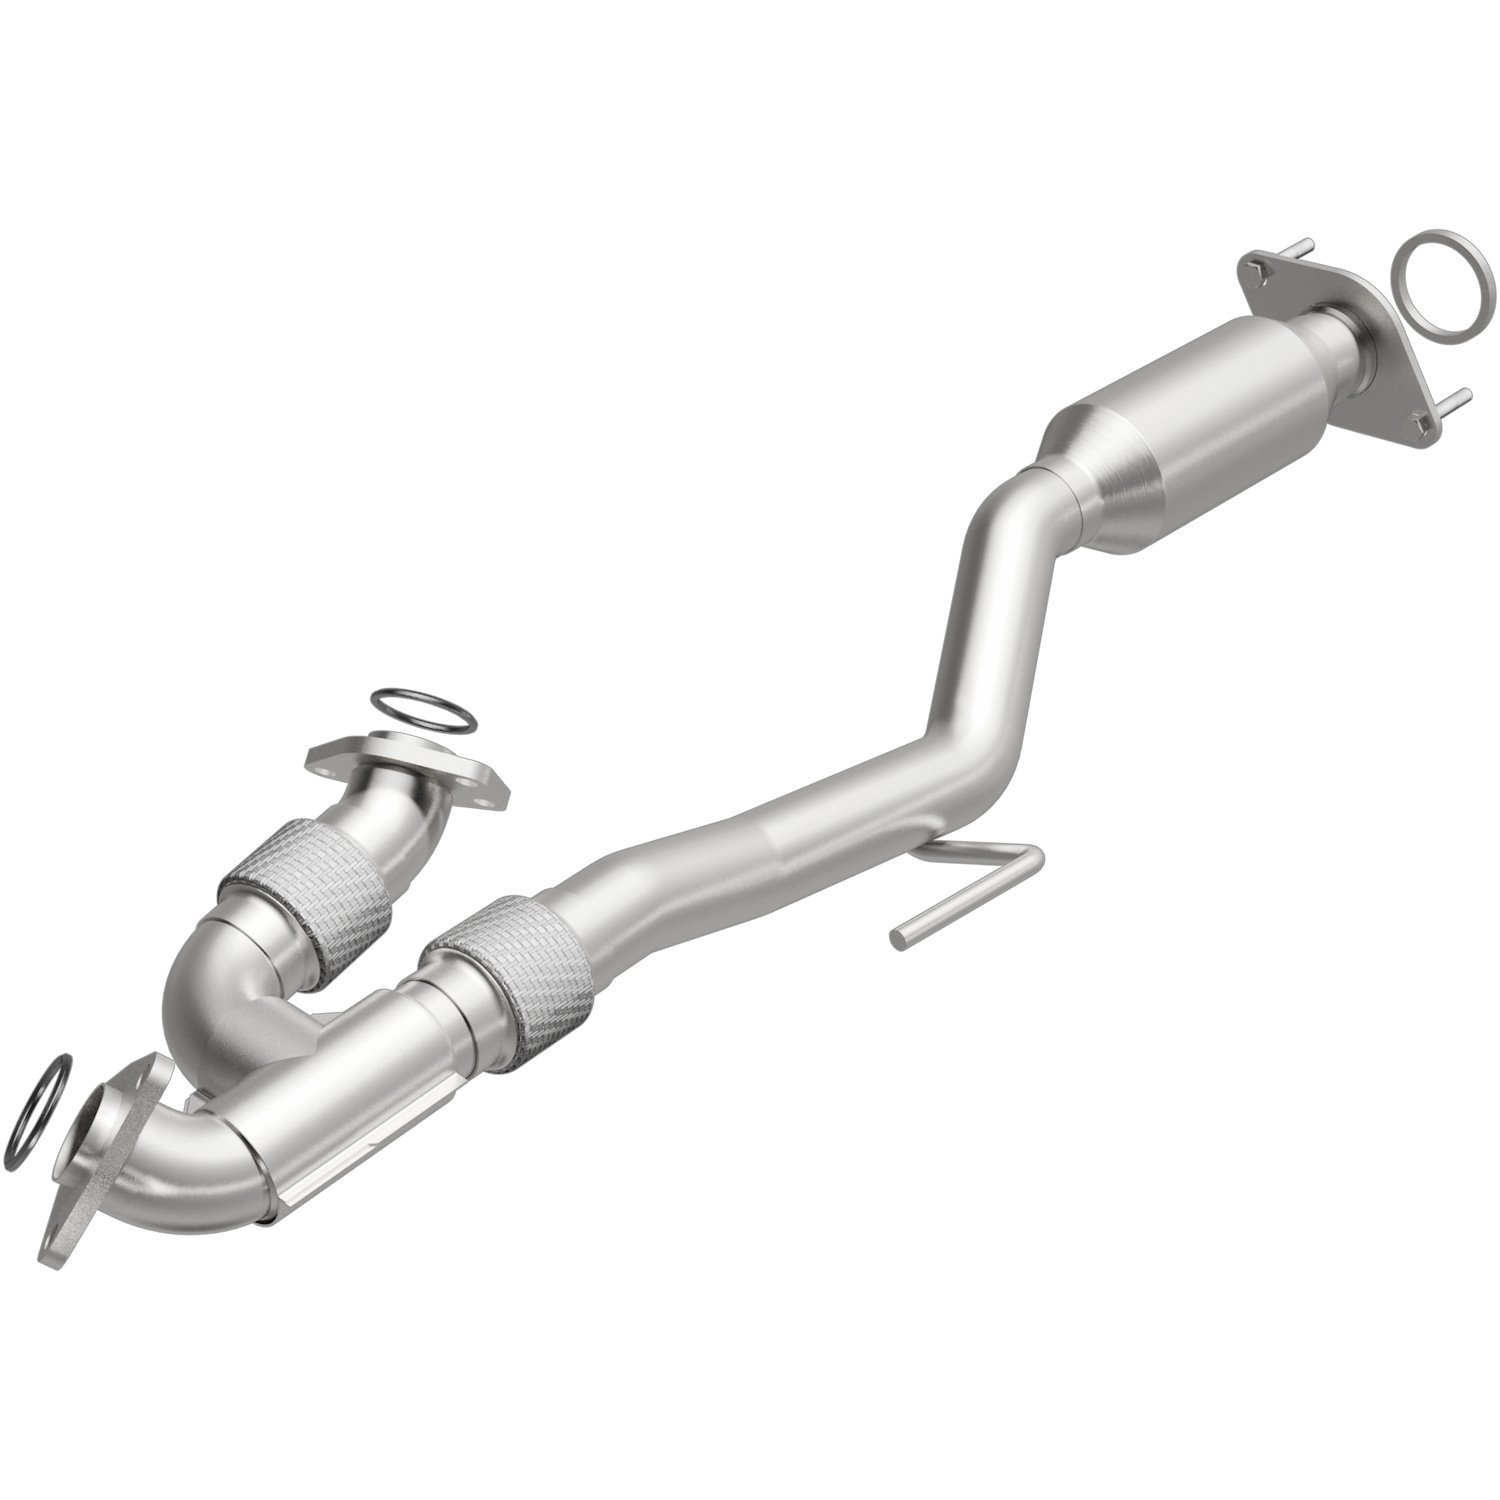 2011-2014 Nissan Quest OEM Grade Federal / EPA Compliant Direct-Fit Catalytic Converter